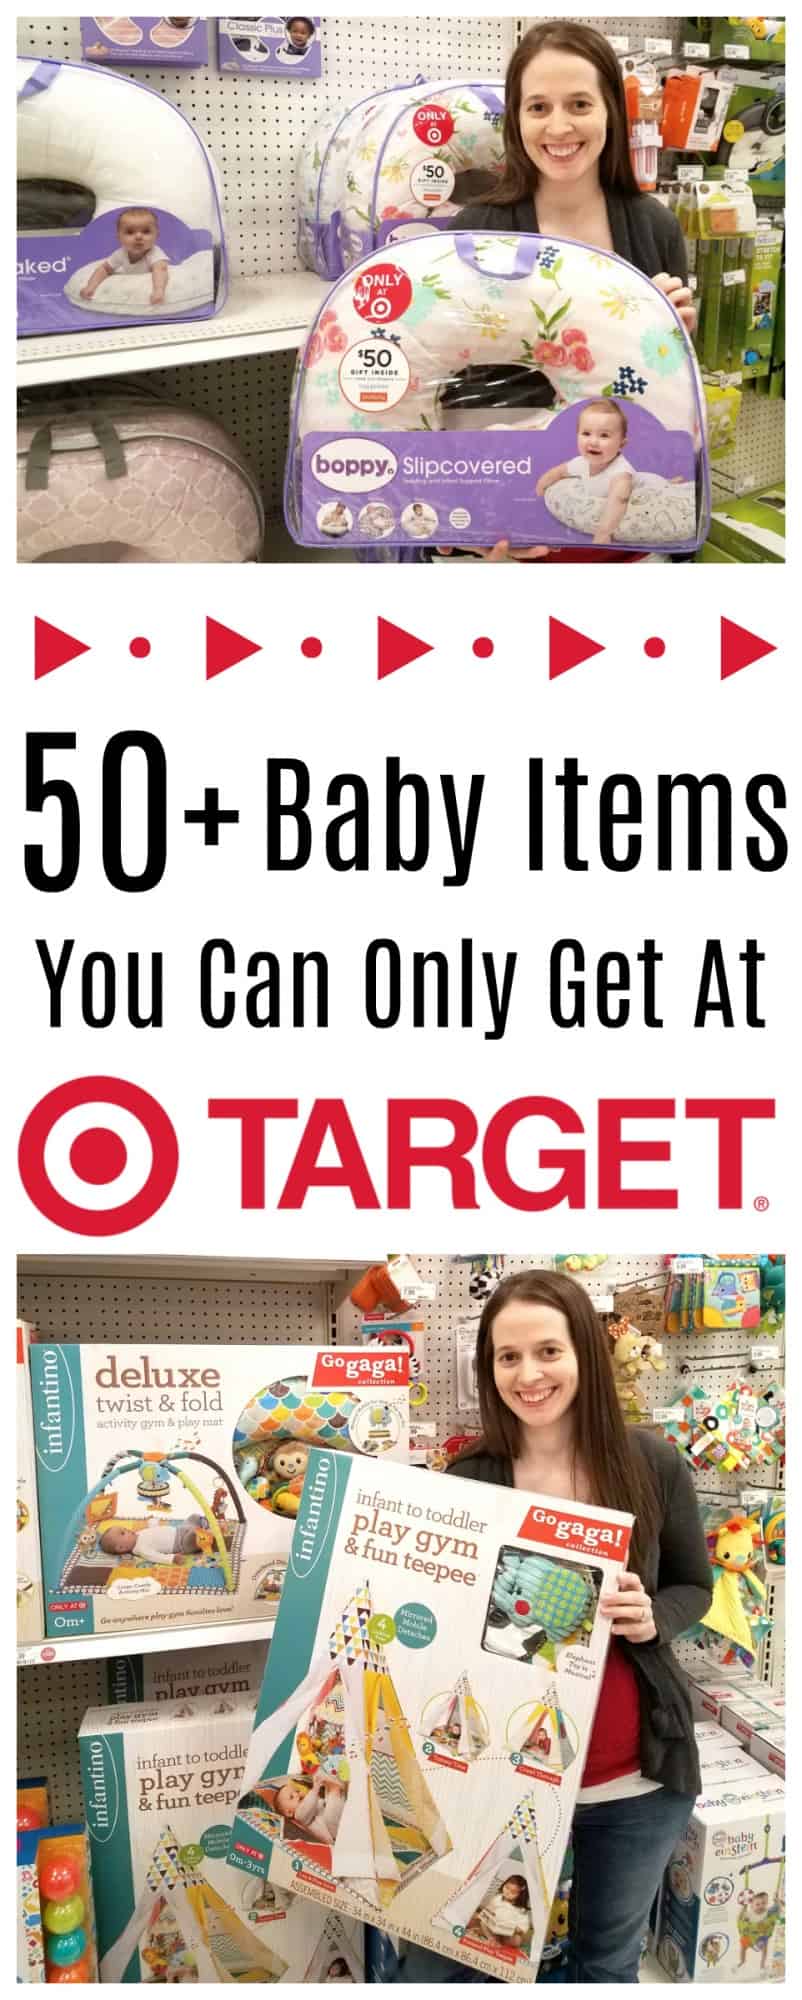 Baby Items that are Target Exclusives